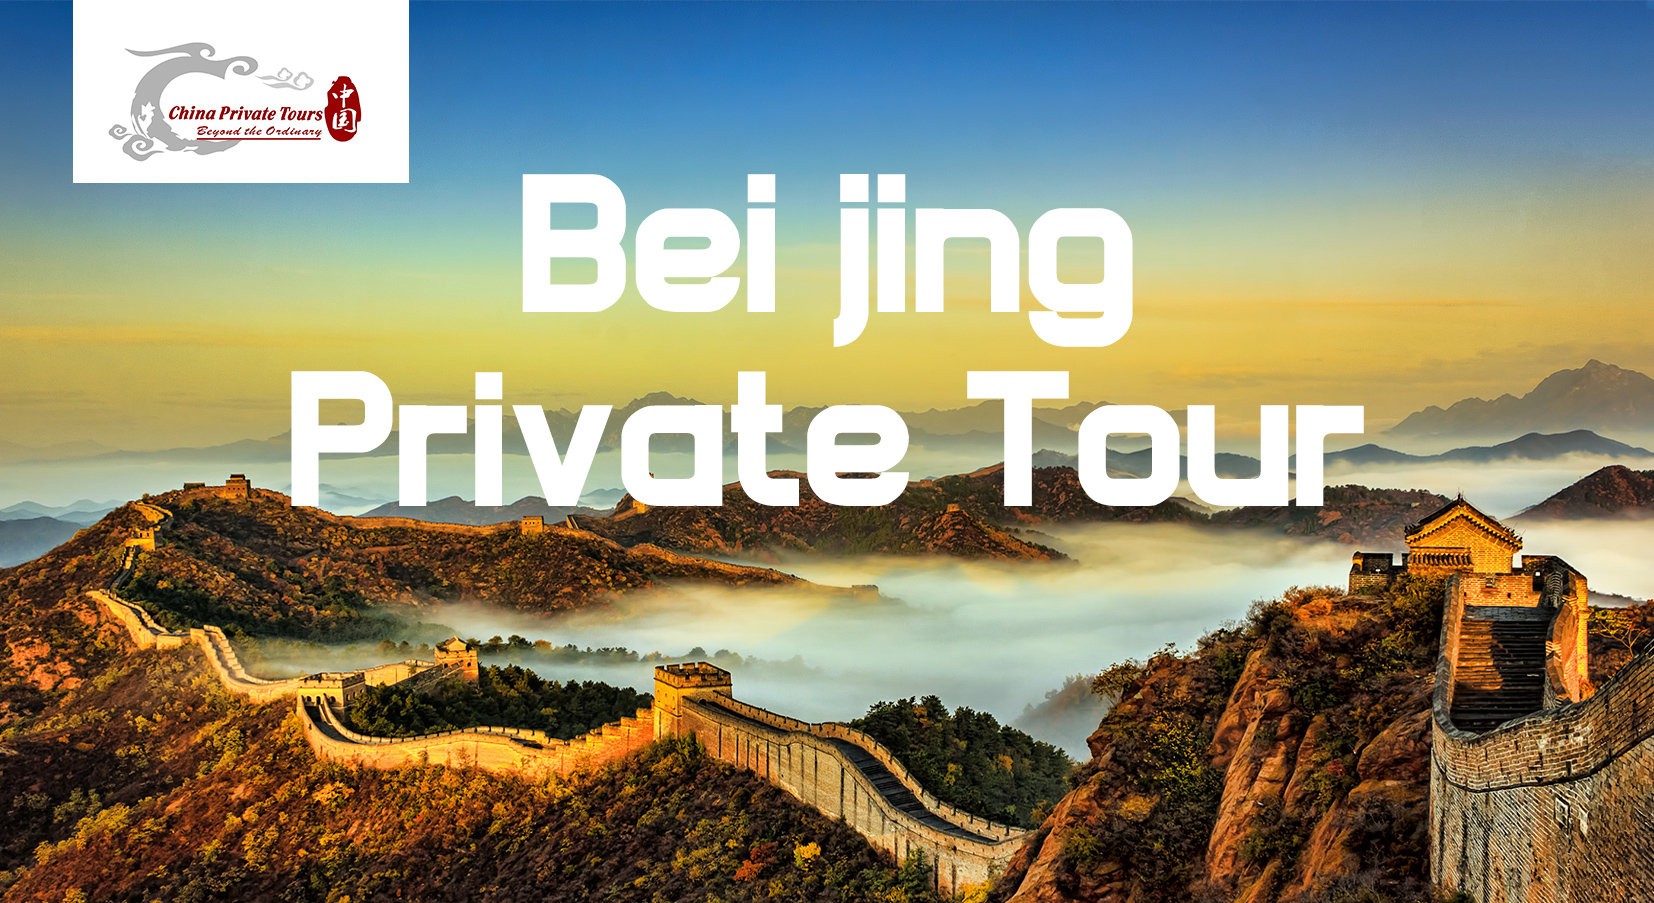 Beijing Private Tour